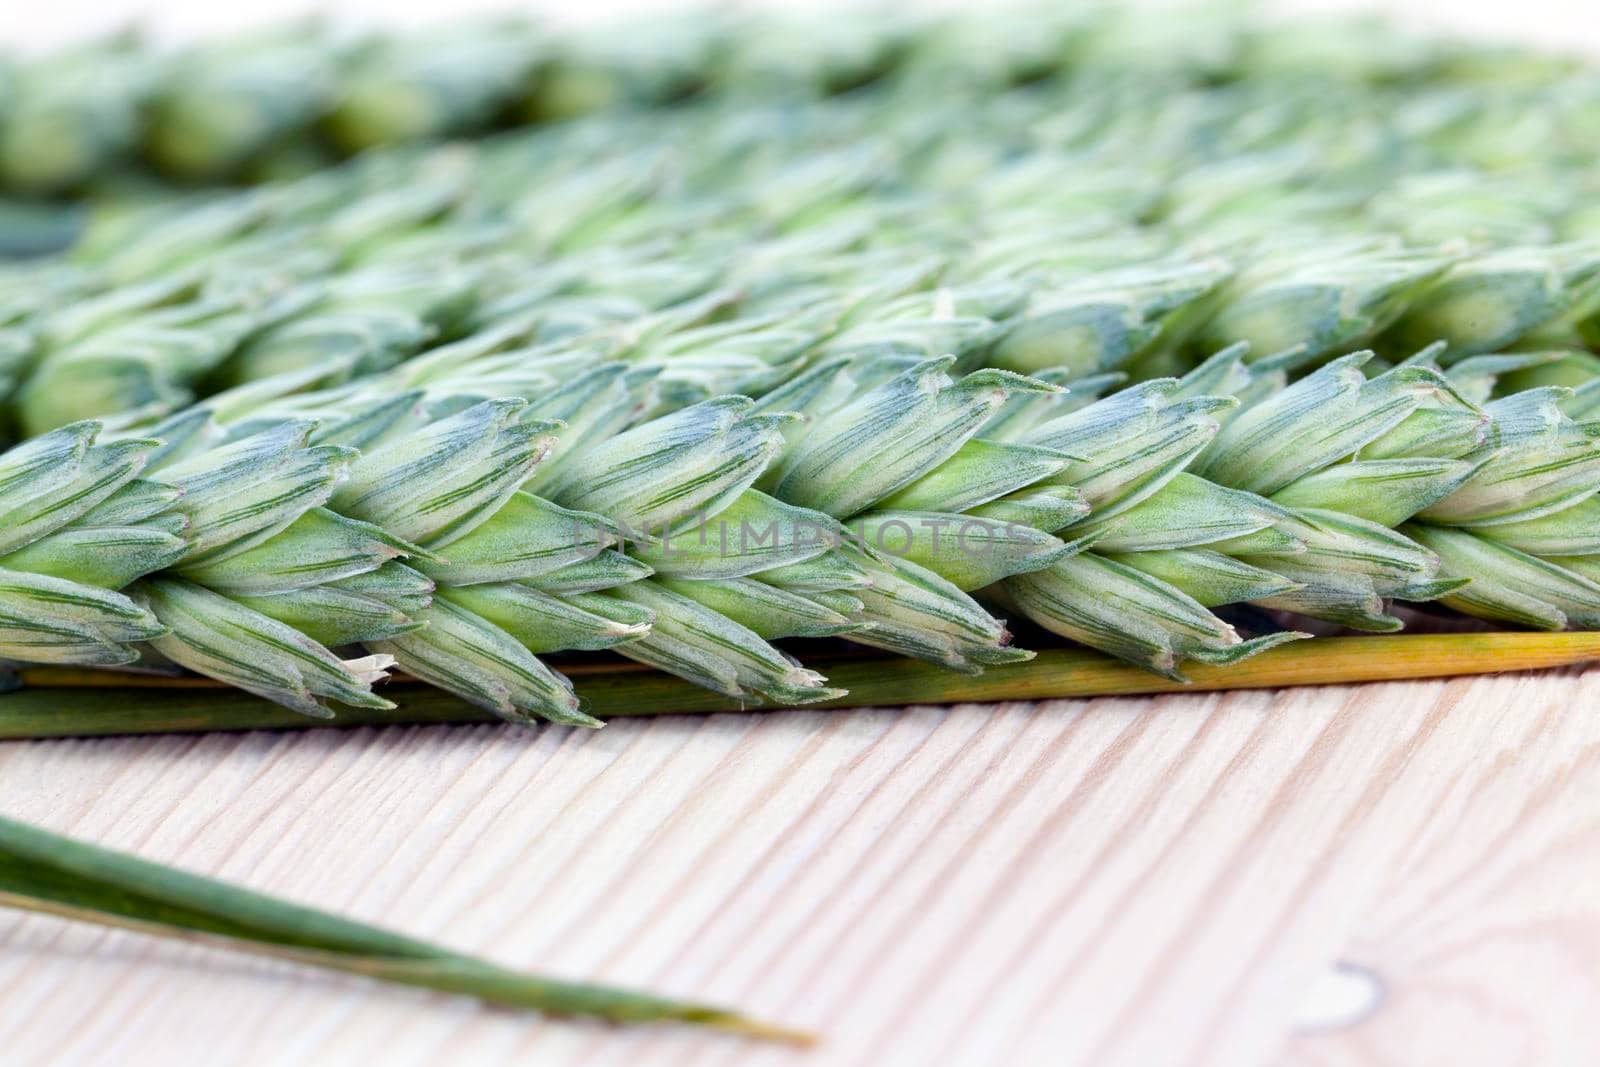 Light Table are a few green Ears of wheat, closeup